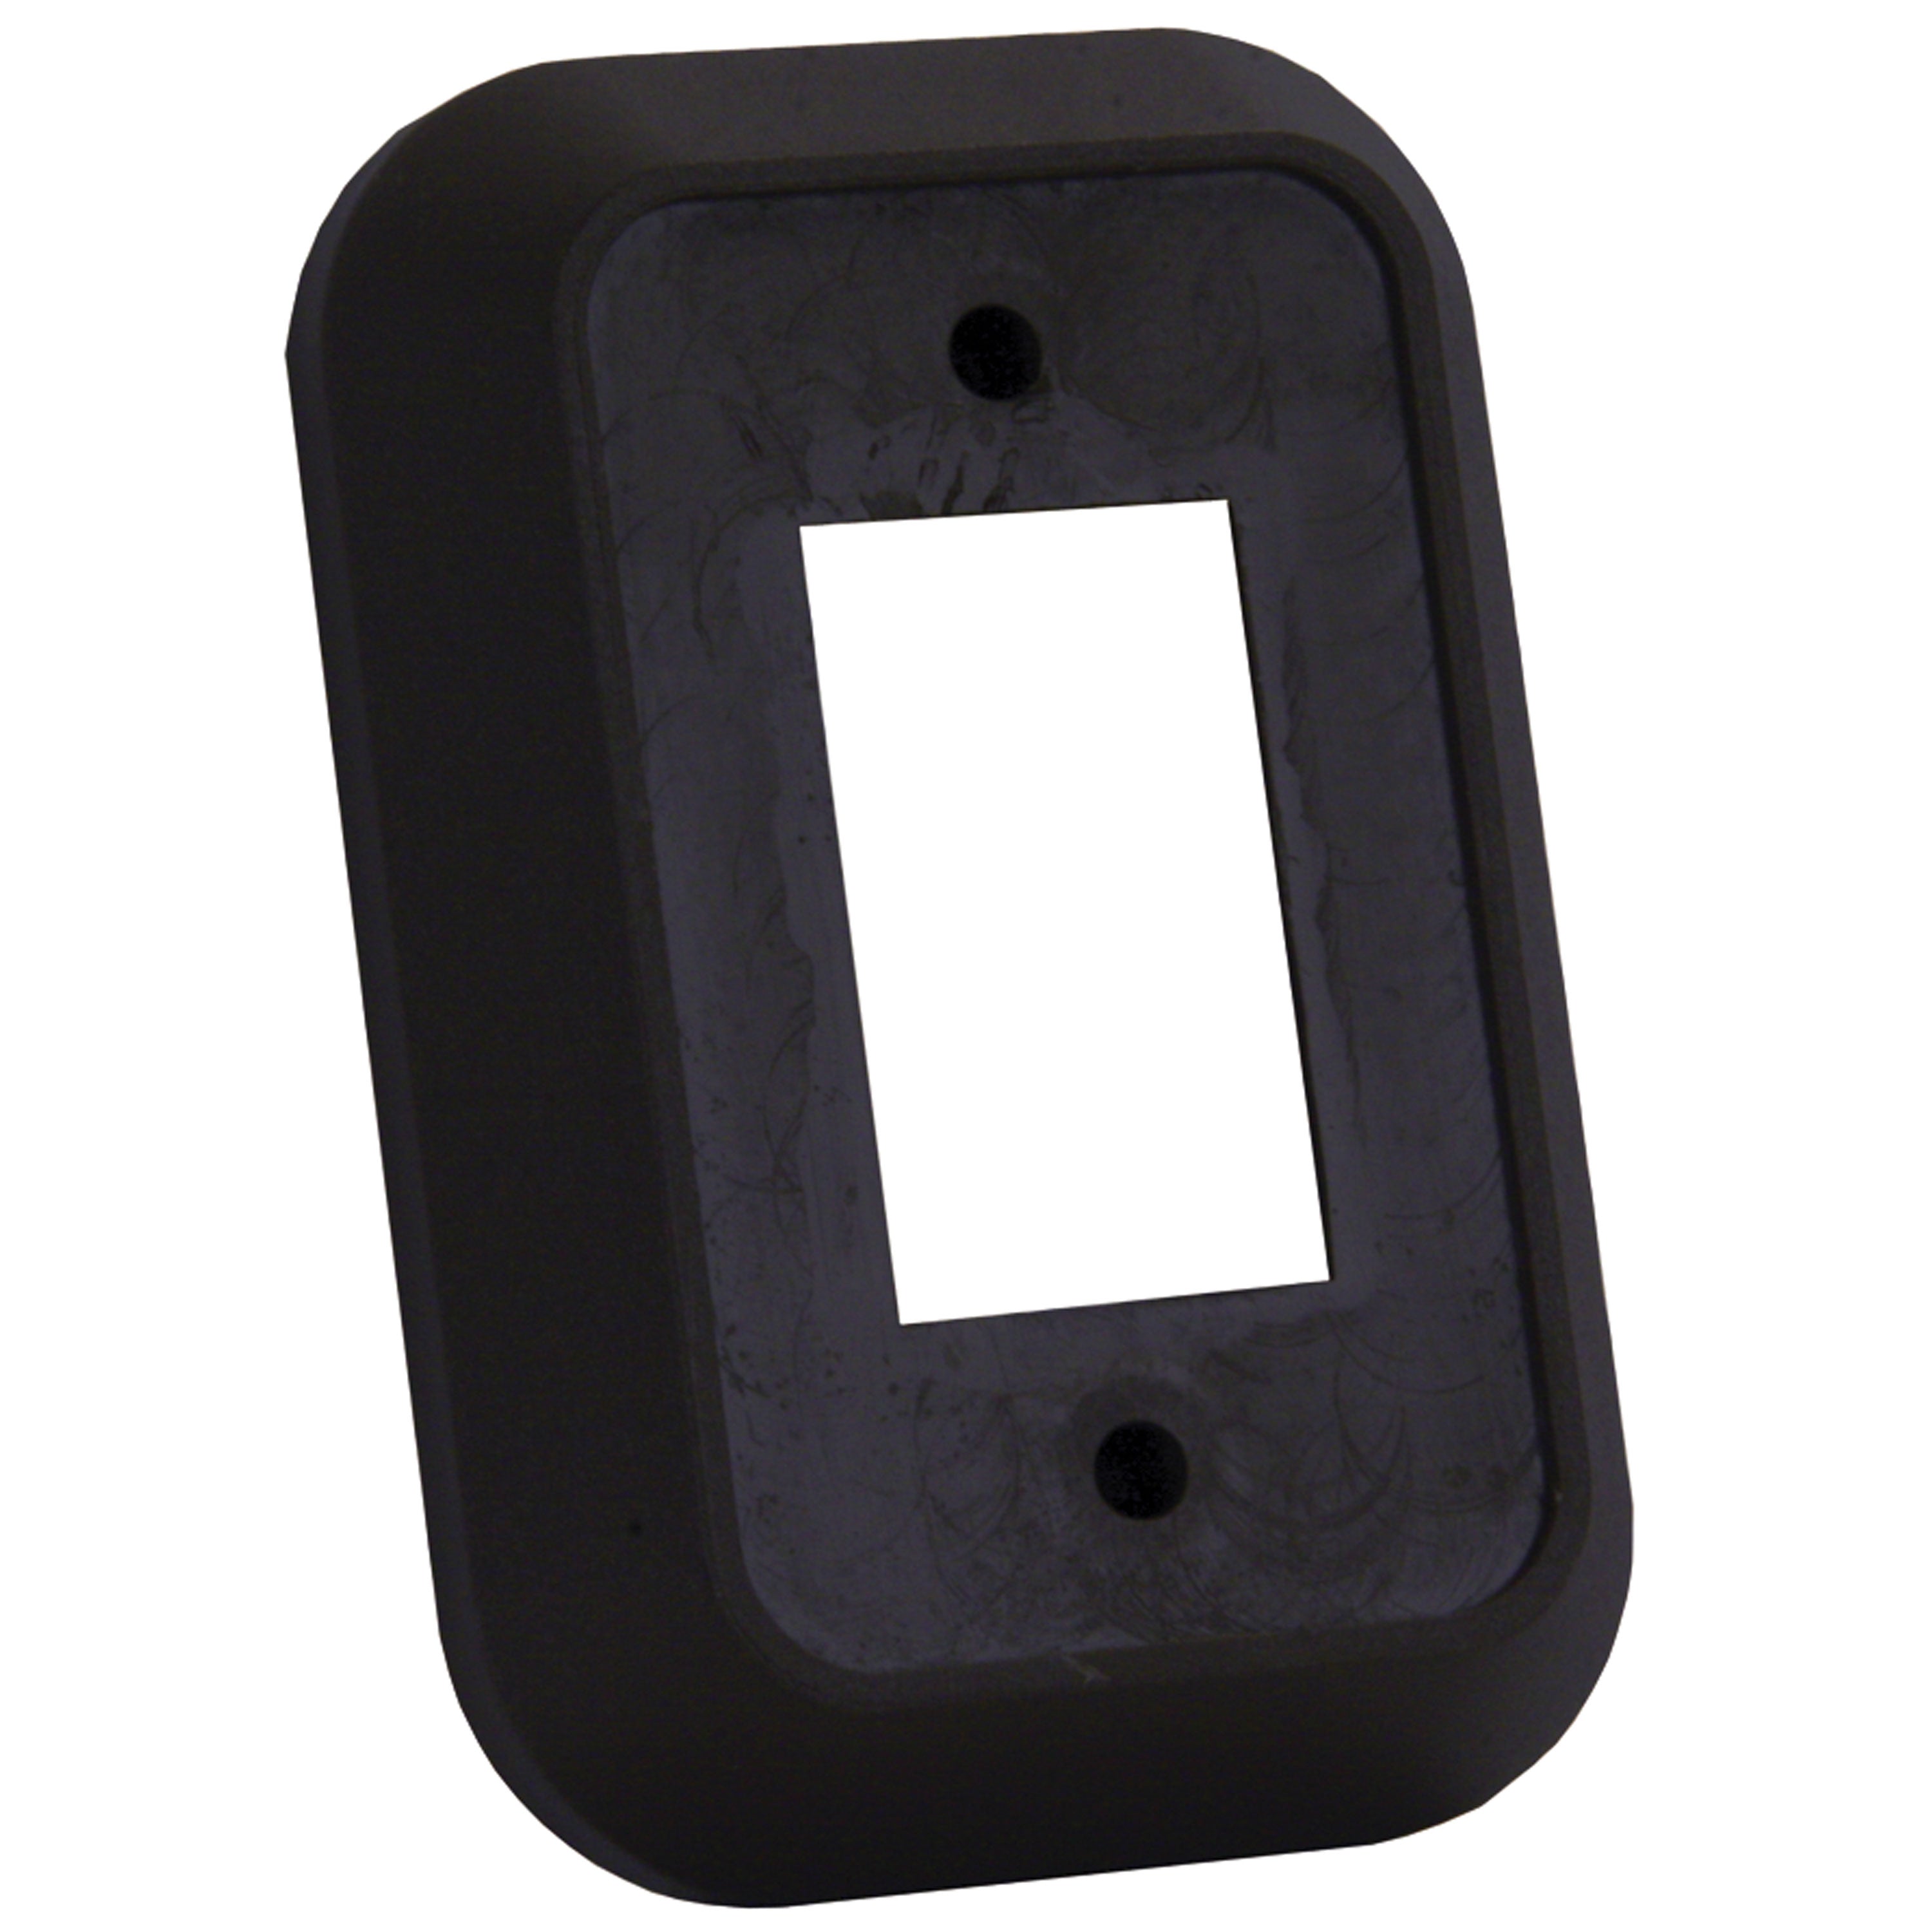 JR Products 13495 Single Switch Wall Spacer - Black